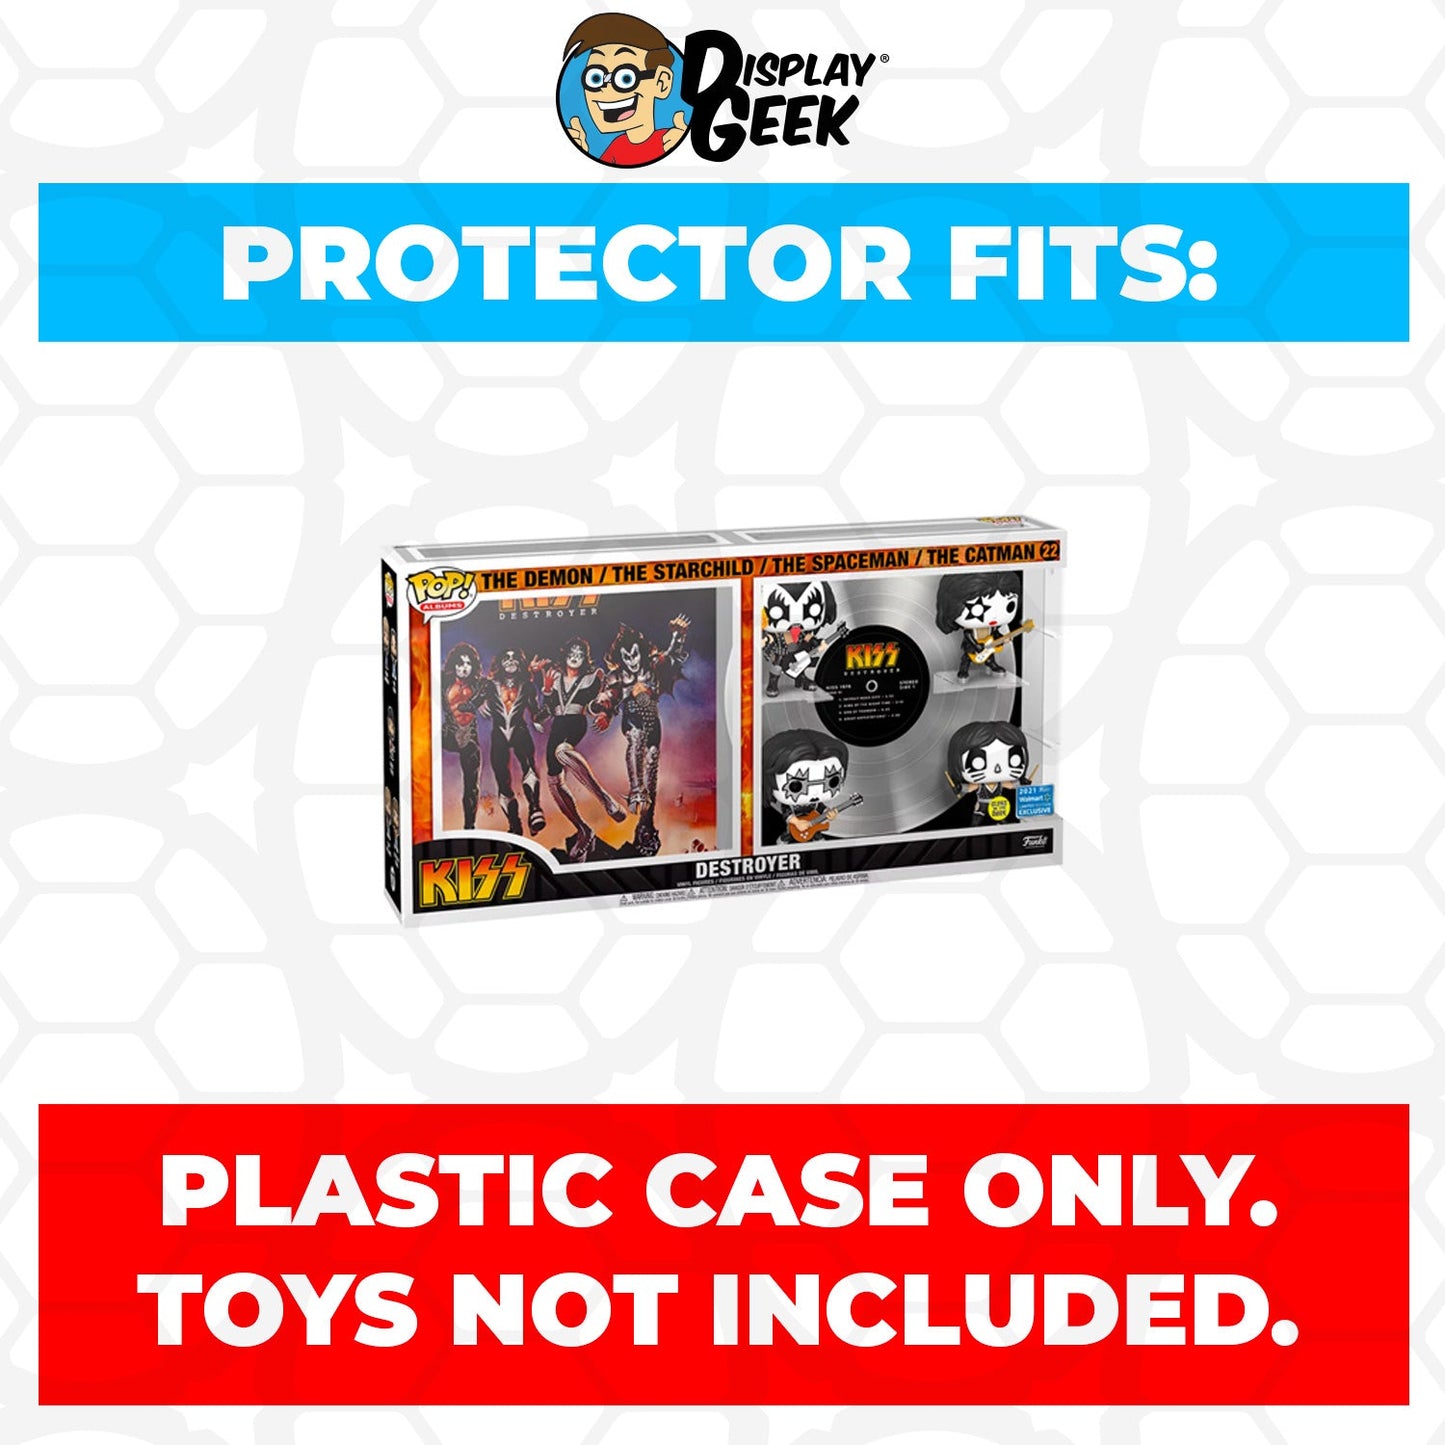 Pop Protector for KISS Destroyer GITD #22 Funko Pop Albums Deluxe - PPG Pop Protector Guide Search Created by Display Geek